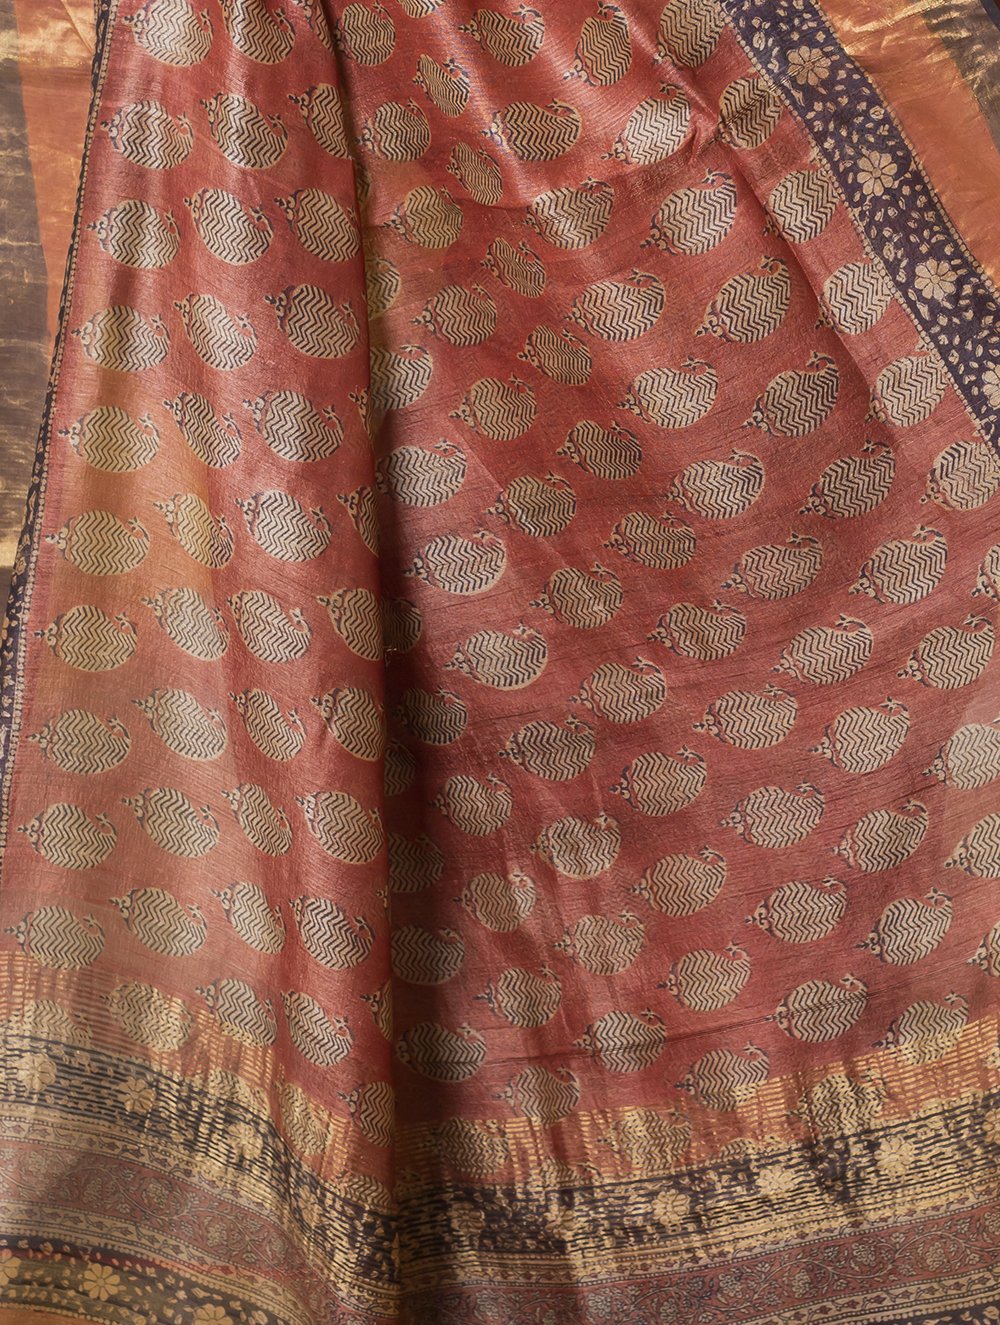 Load image into Gallery viewer, Festive &amp; Exclusive Tassar Silk Bagru Saree (With Blouse Piece) - Warm Red, Beige &amp; Dull Gold